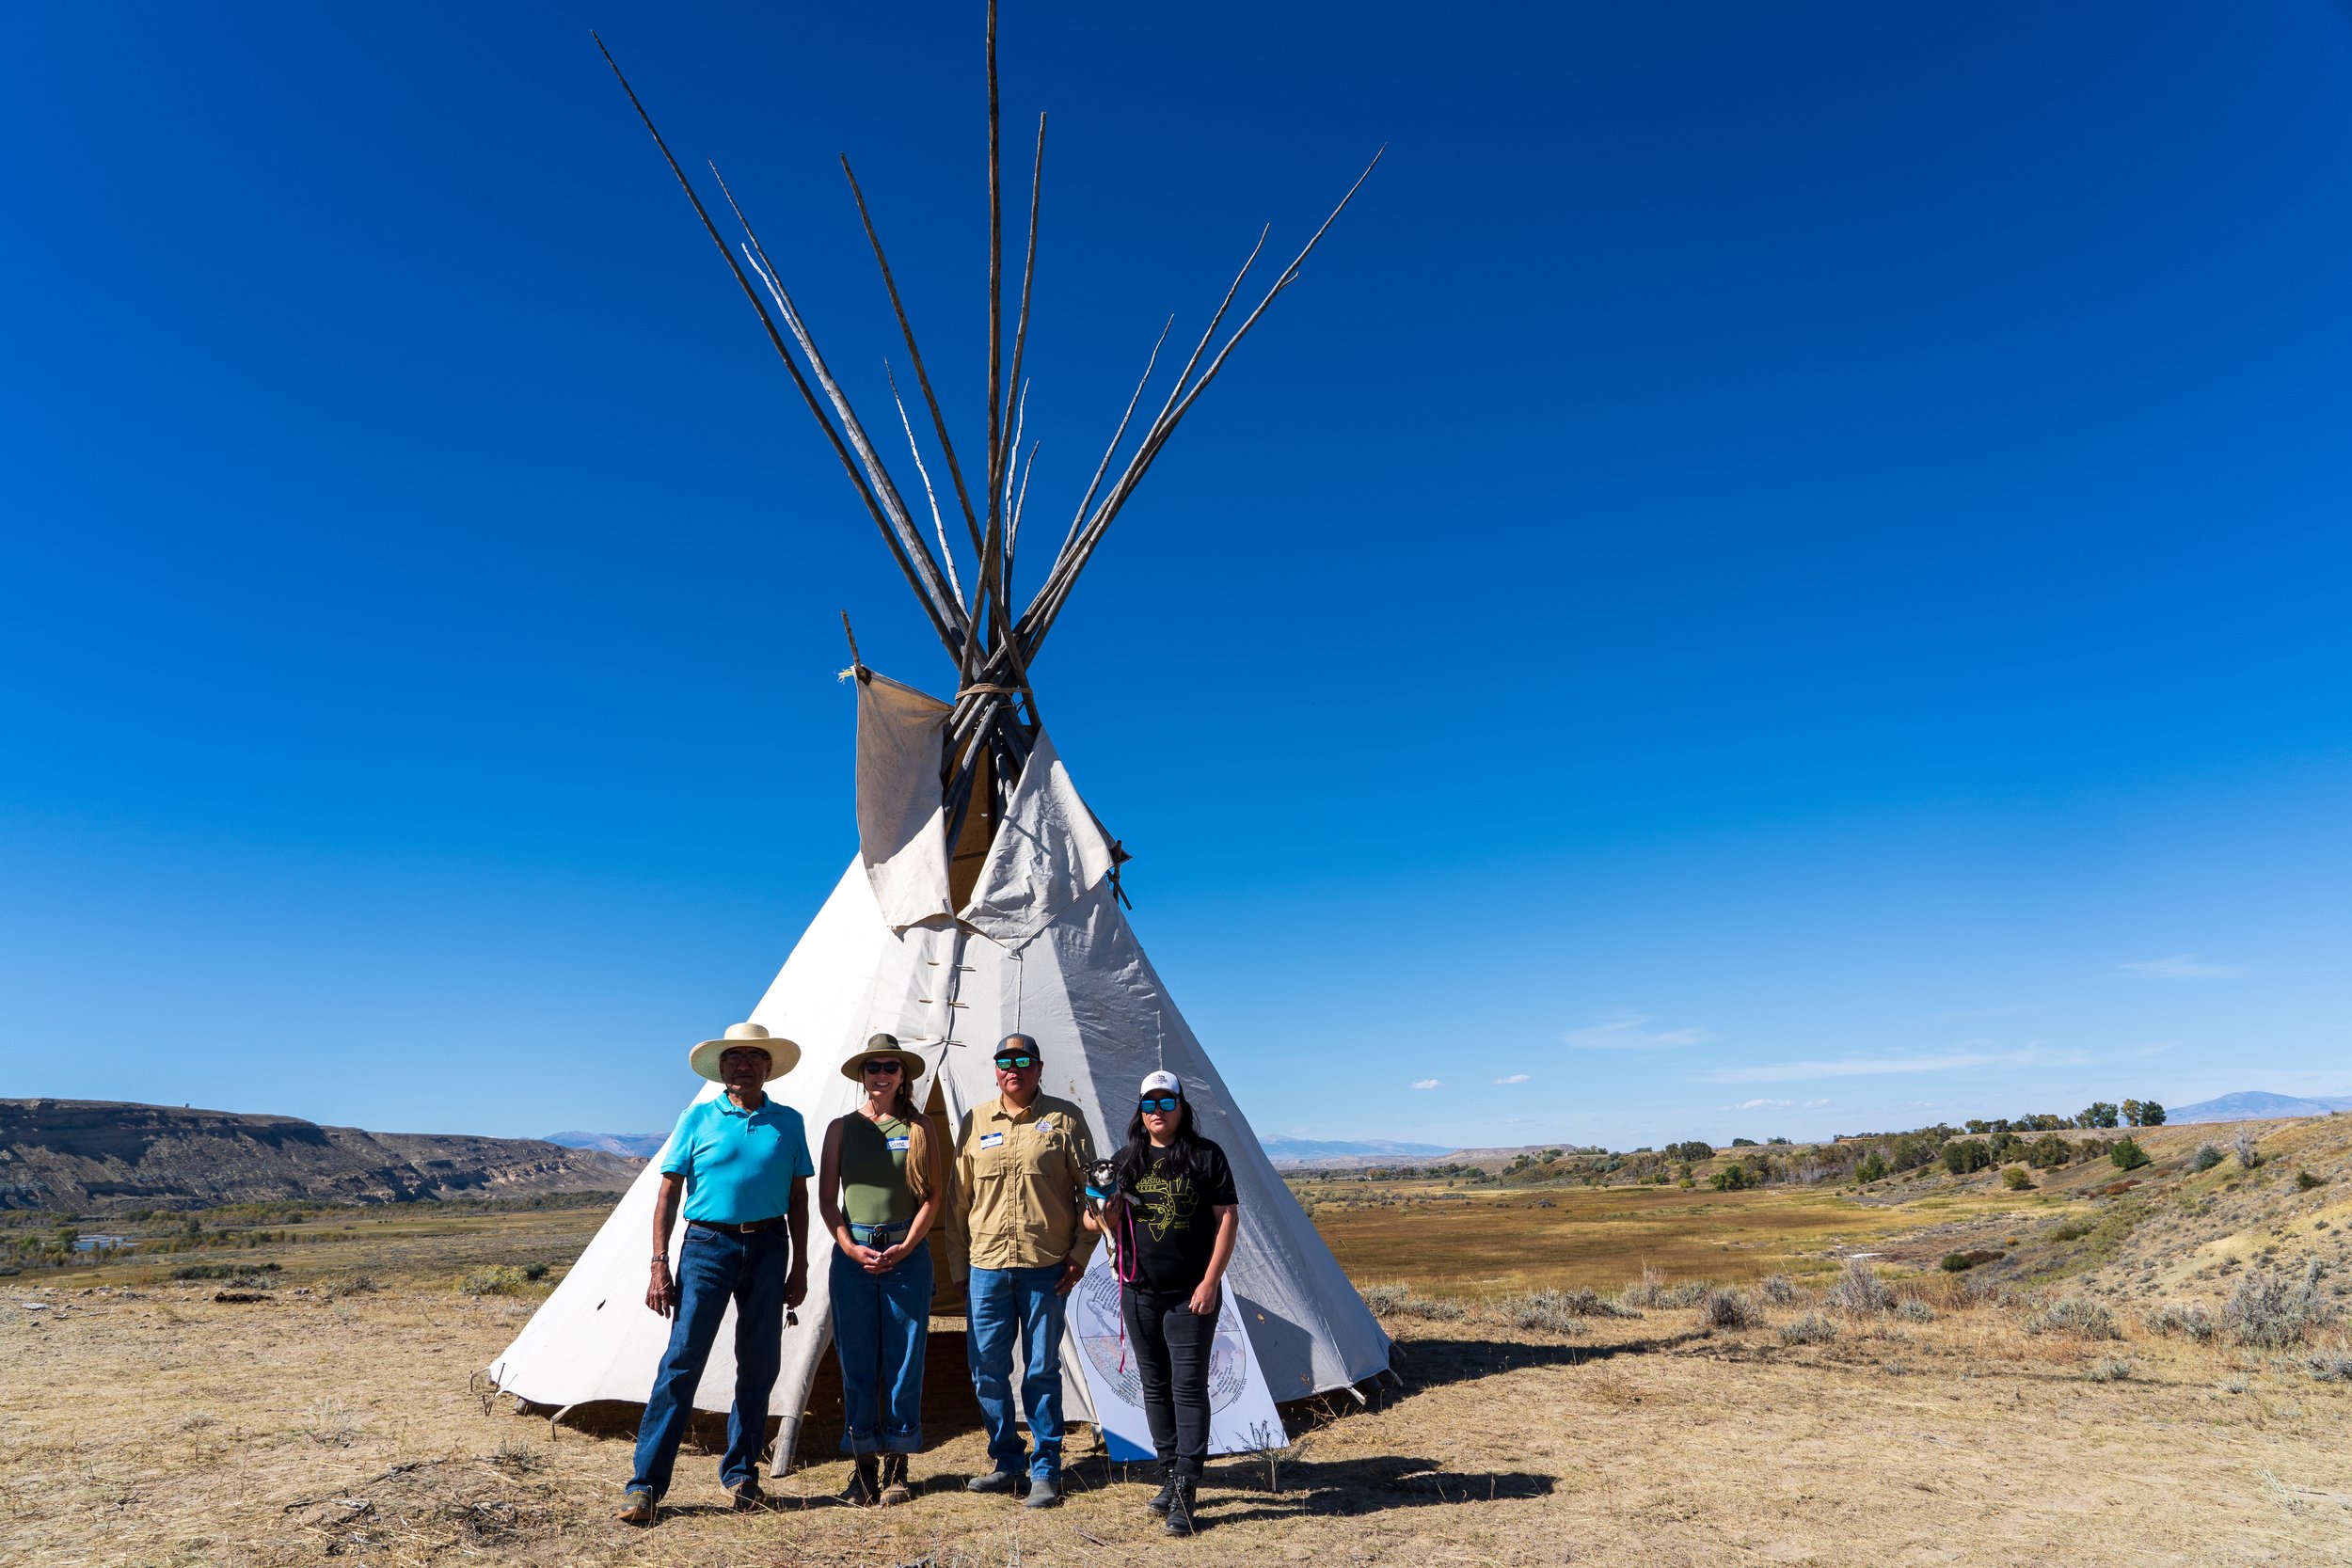  (L-R) GYC’s Senior Wind River Conservation Associate Wes Martel, Haub School of Environment and Natural Resources Graduate Assistant Janna Black, and GYC’s Wind River Conservation Organizers Colleen Friday and Signa McAdams organized the Indigenous 